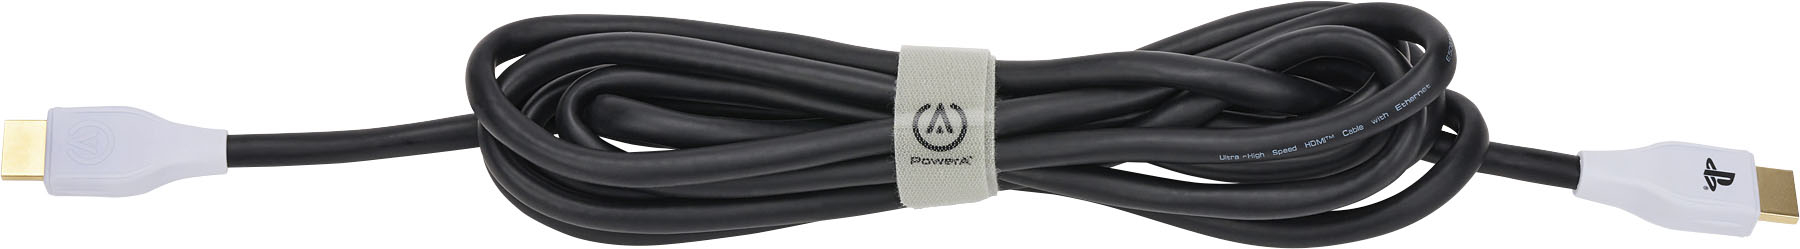 PowerA Ultra High Speed HDMI Cable Review 